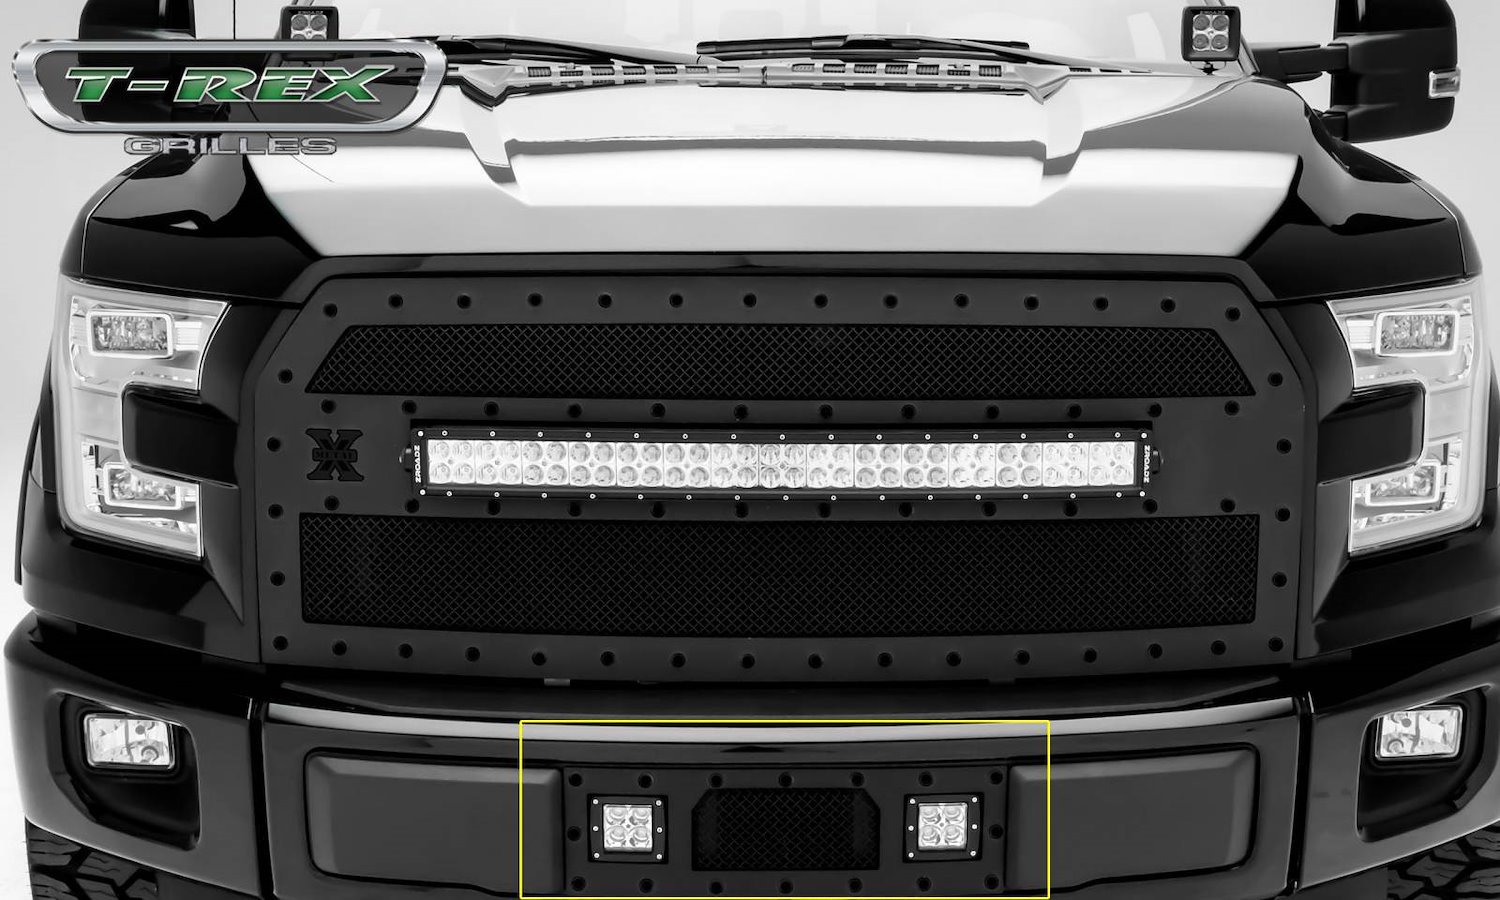 Ford F150 Torch Series LED Ligfht Bumper Grille 2- 3 Light Cubes Black Powder Coated w/Blk Studs